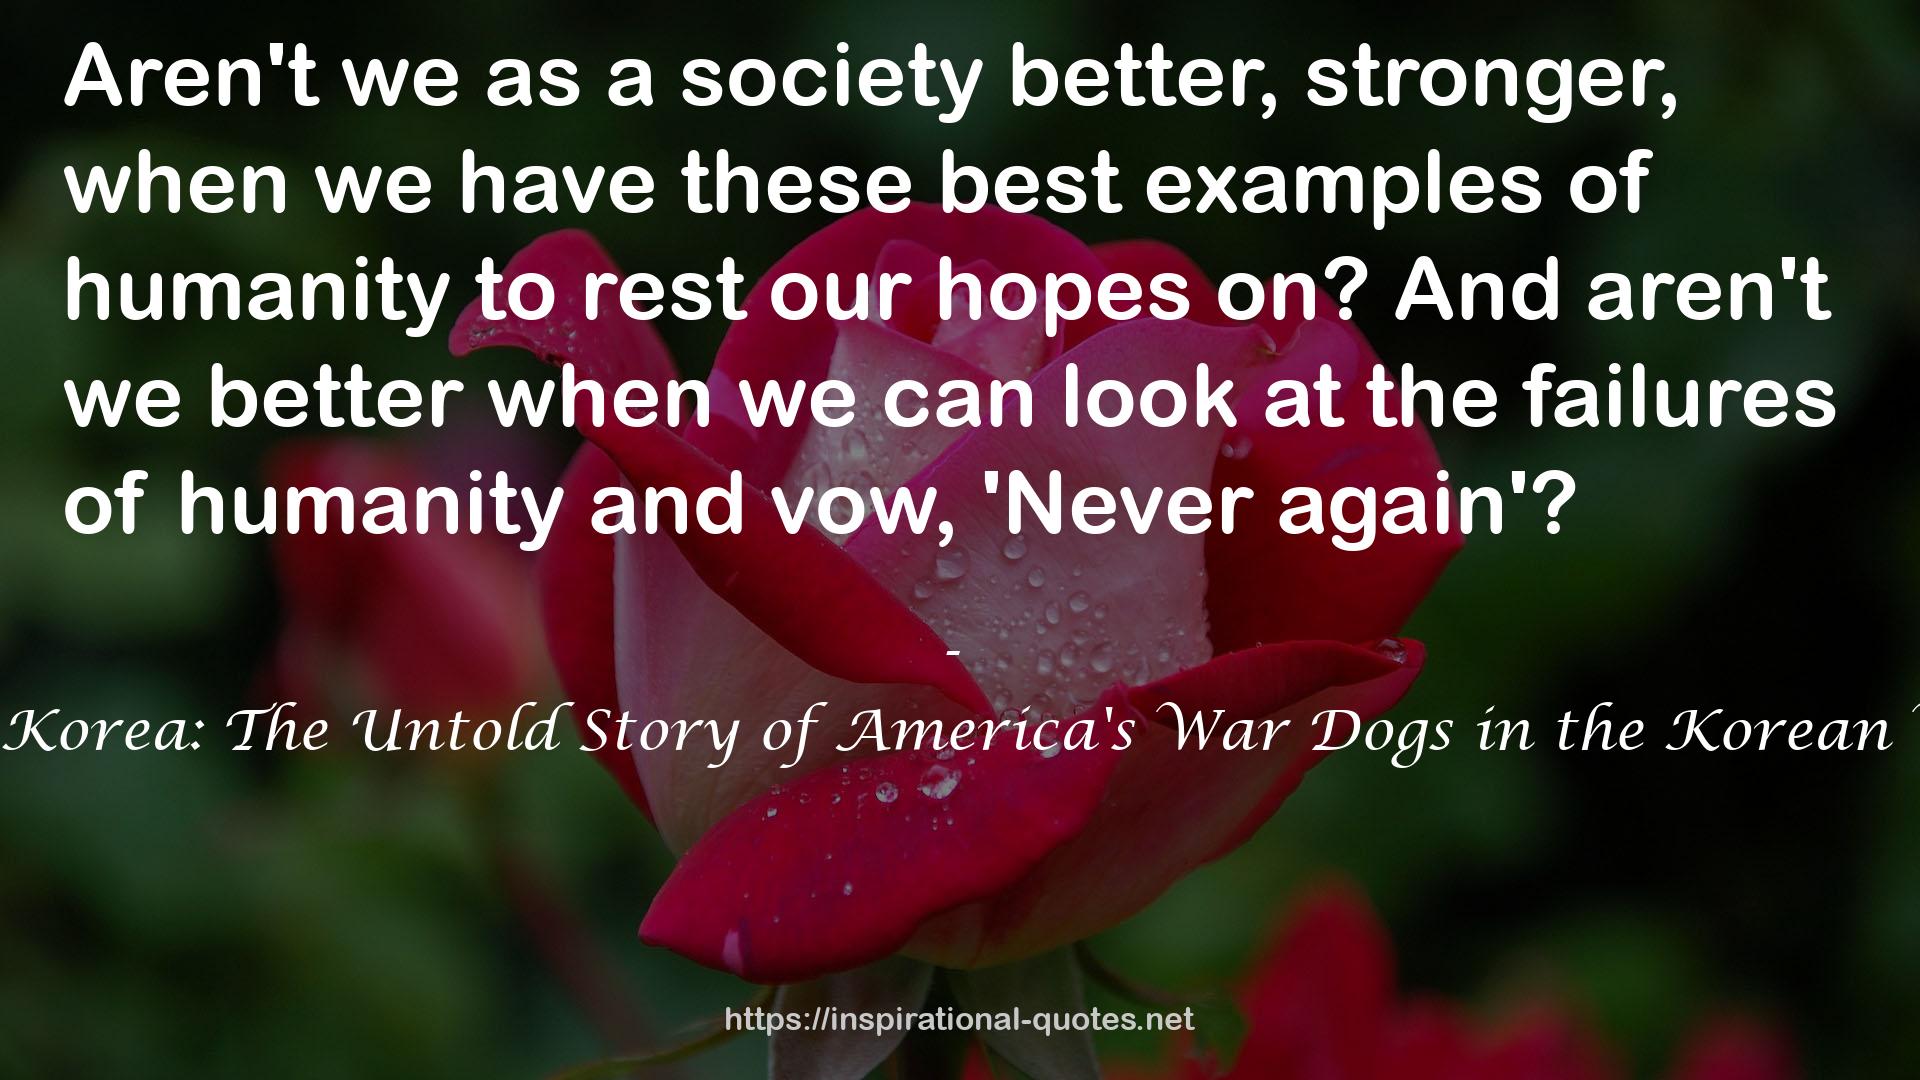 K-9 Korea: The Untold Story of America's War Dogs in the Korean War QUOTES